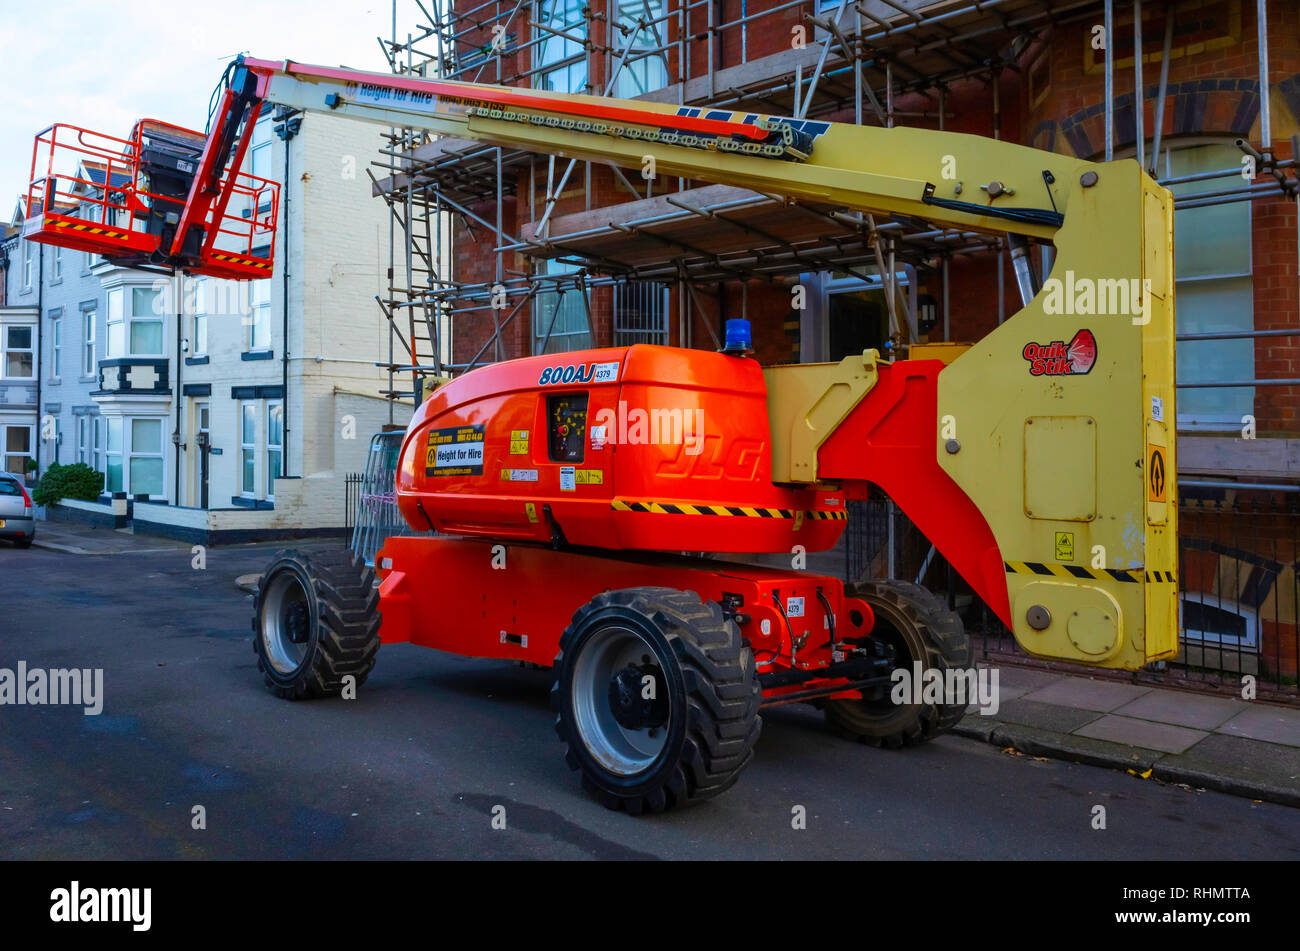 Height for Hire a JLG type 800 AJ mobile hydraulic personnel hoist working on a multi story Victorian building refurbishment Stock Photo